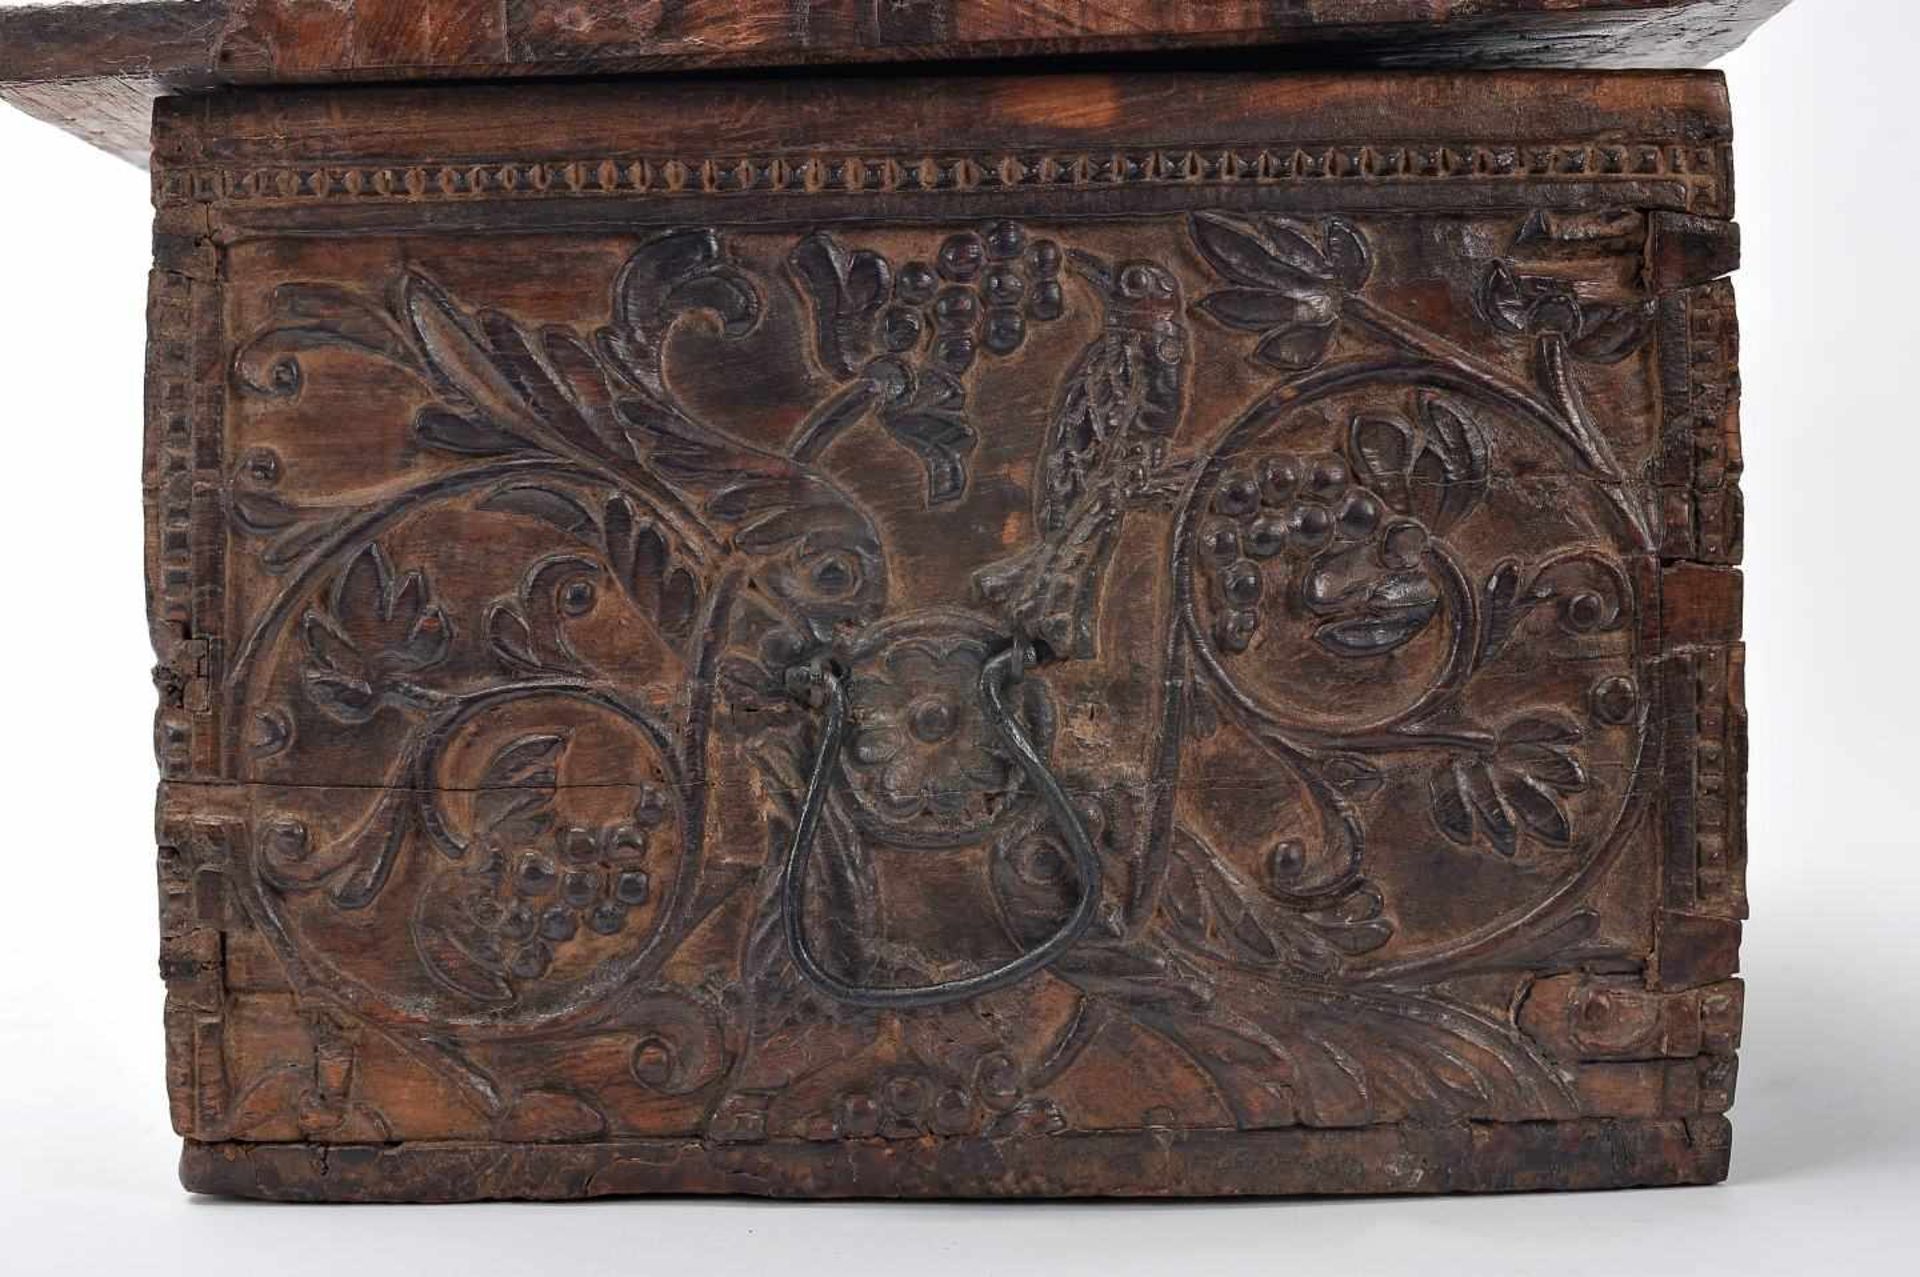 A Small ChestA Small Chest, red anjili wood with traces of polychromy, low-relief decoration " - Image 3 of 4